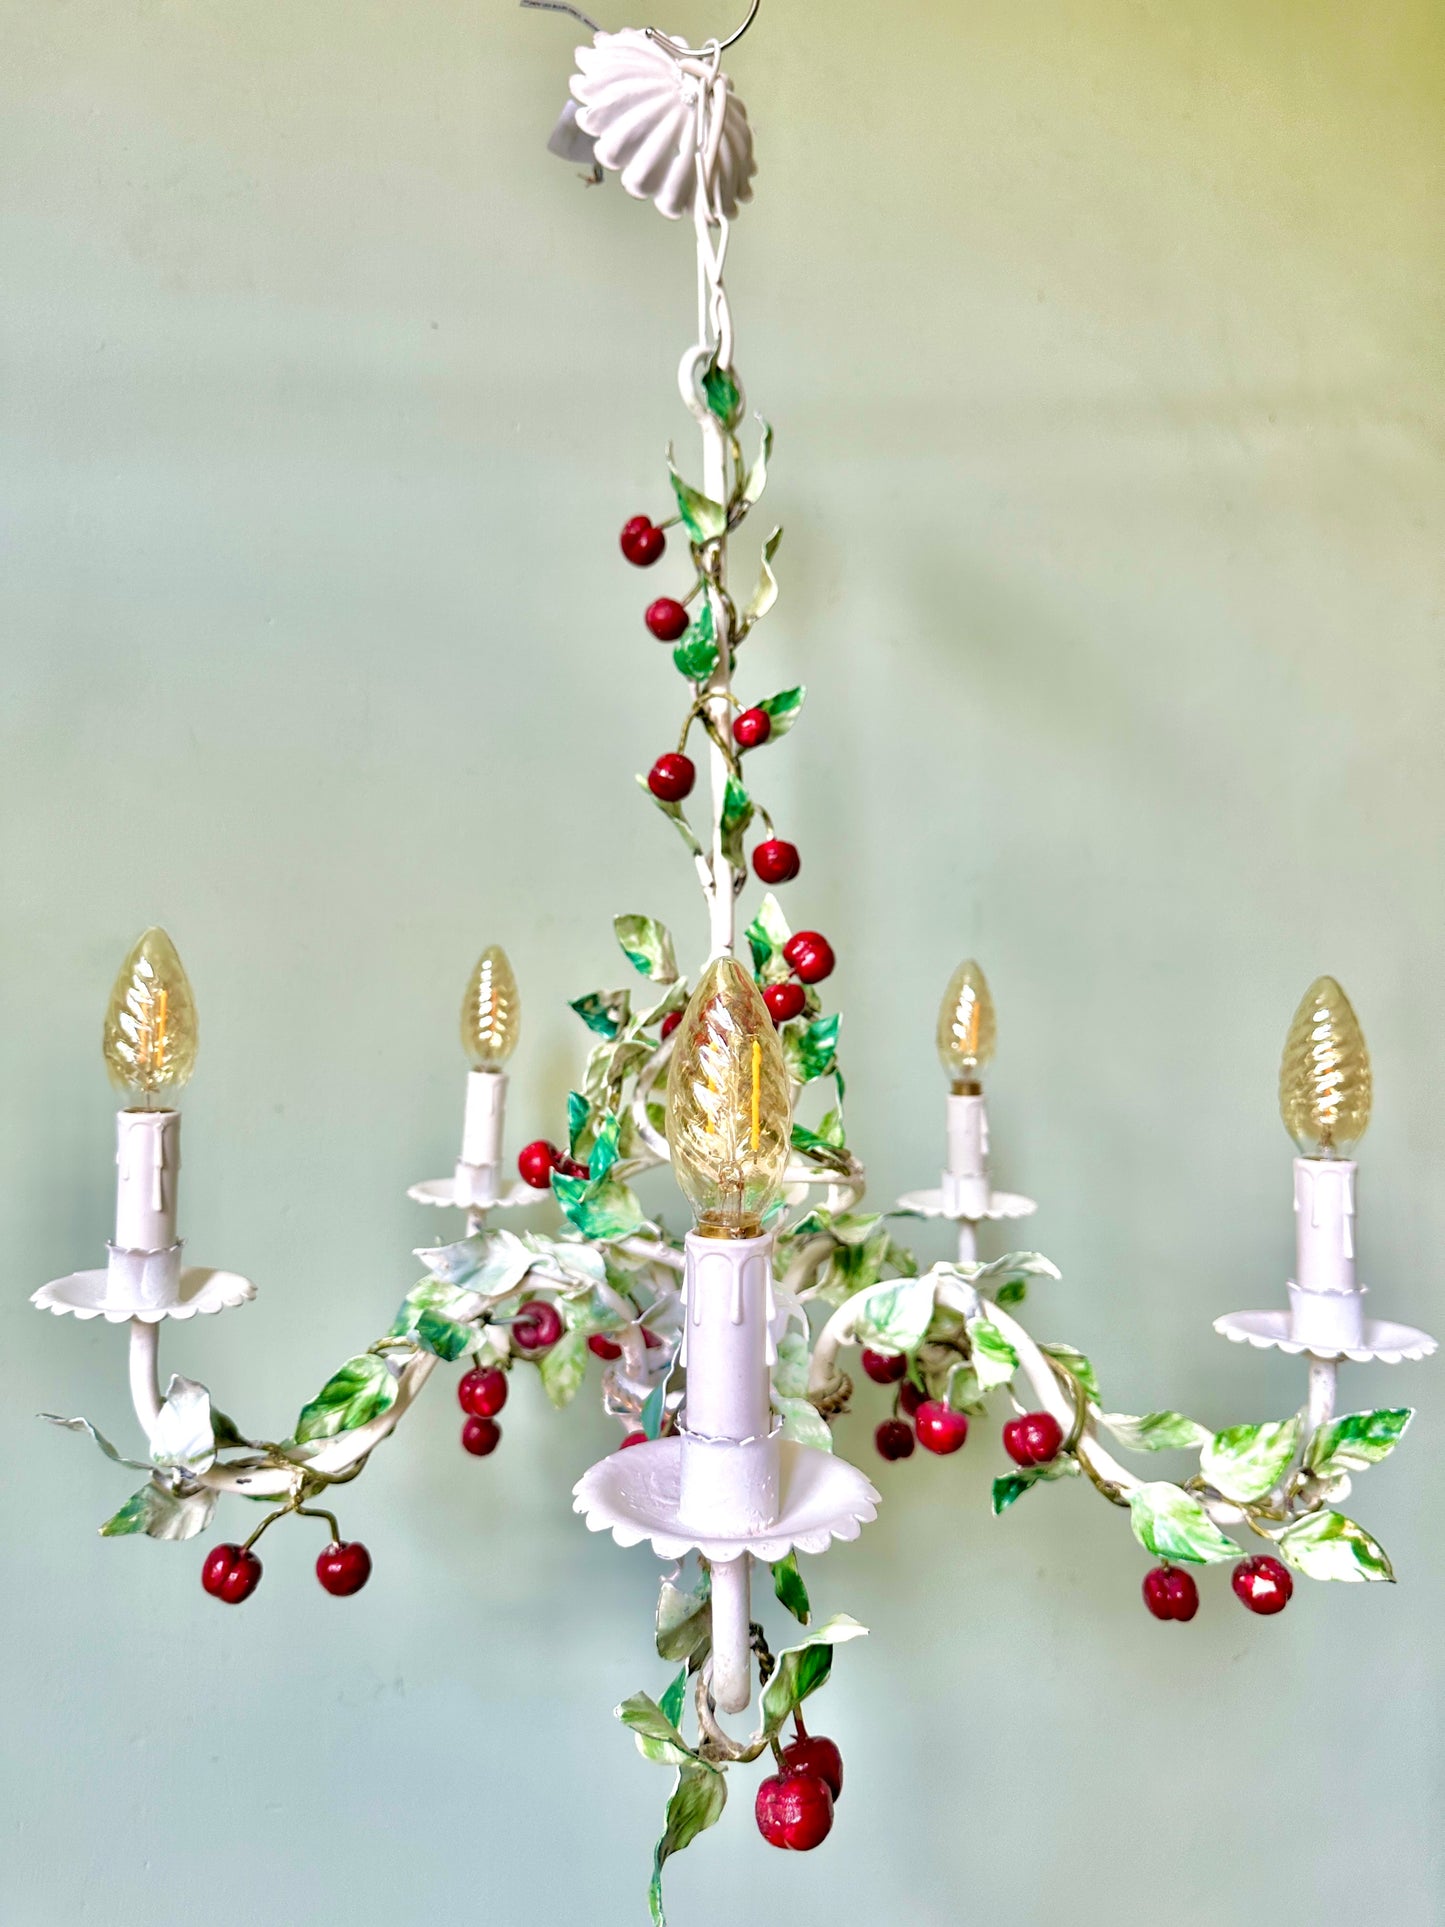 1940s Italian Cherry Toleware Chandelier (1 of 2 Available)